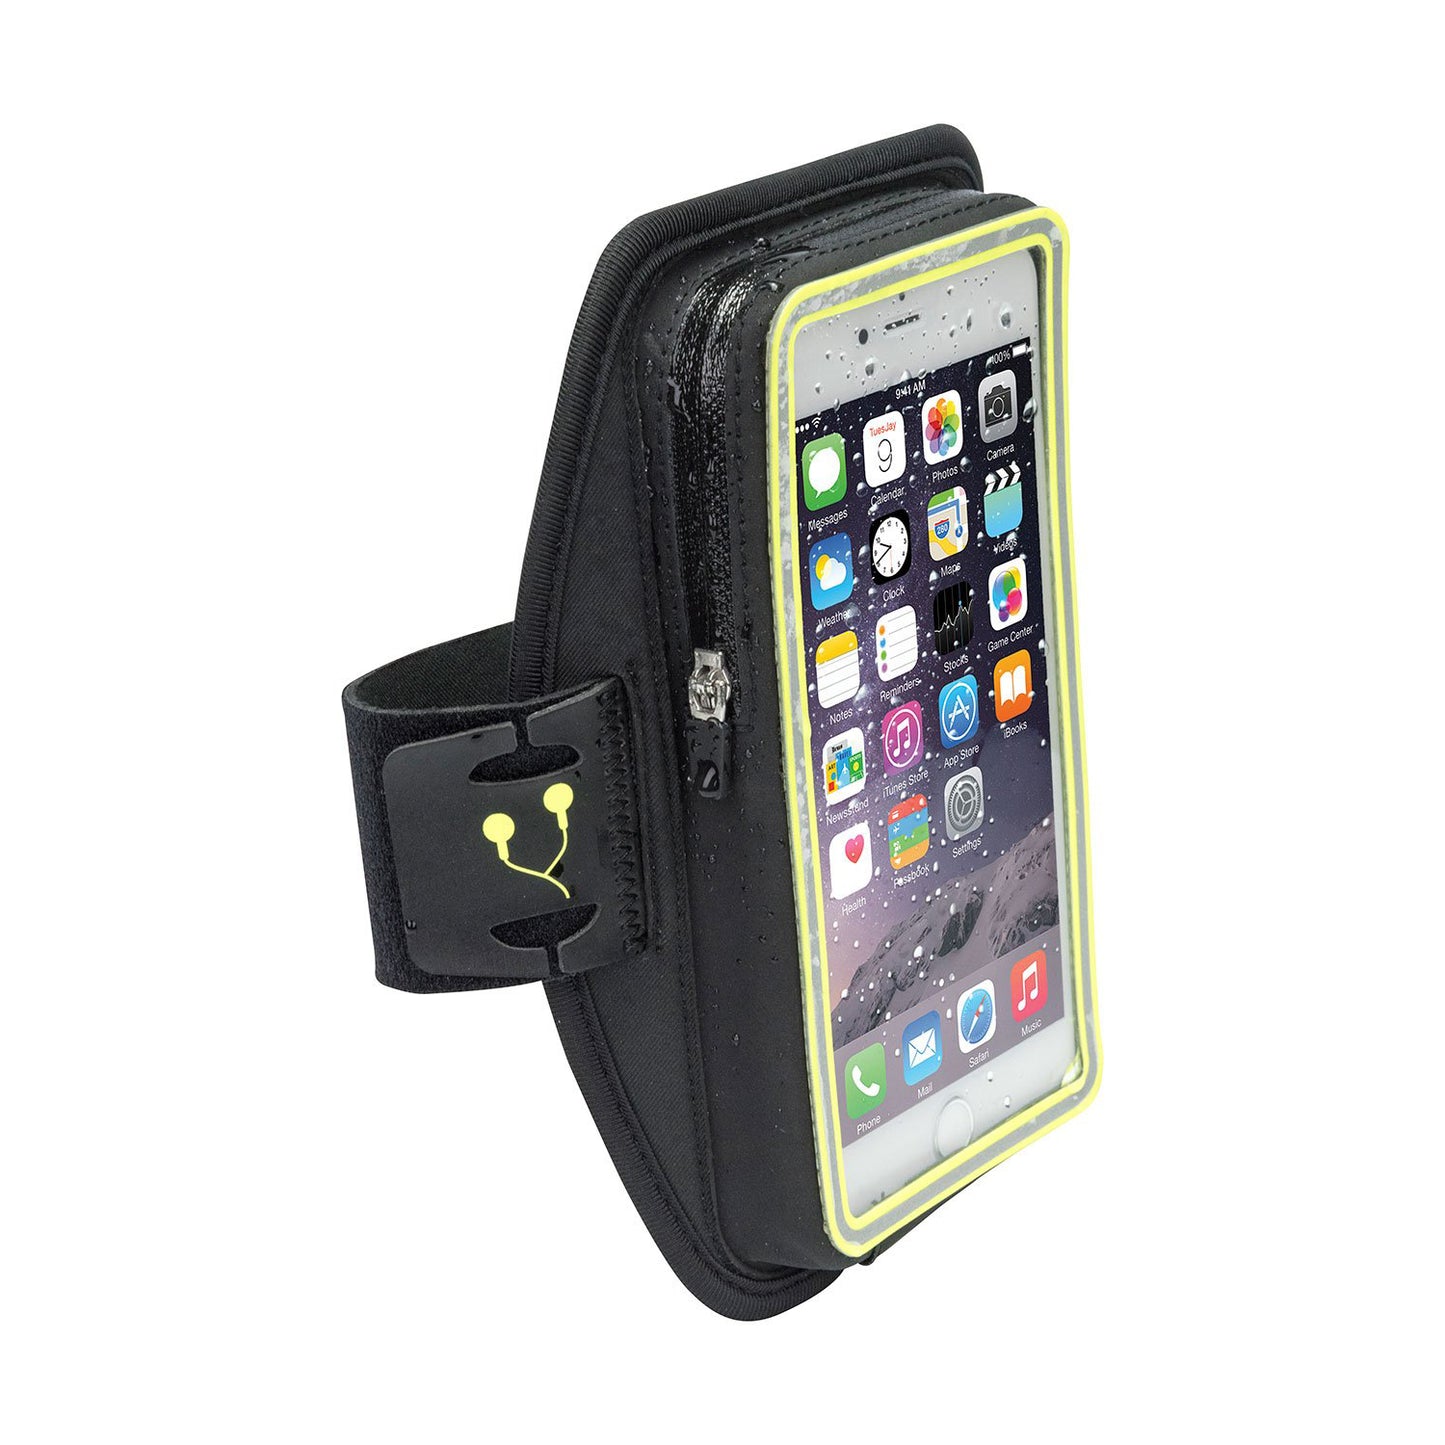 SonicStorm Smartphone Carrier - Black/Safety Yellow